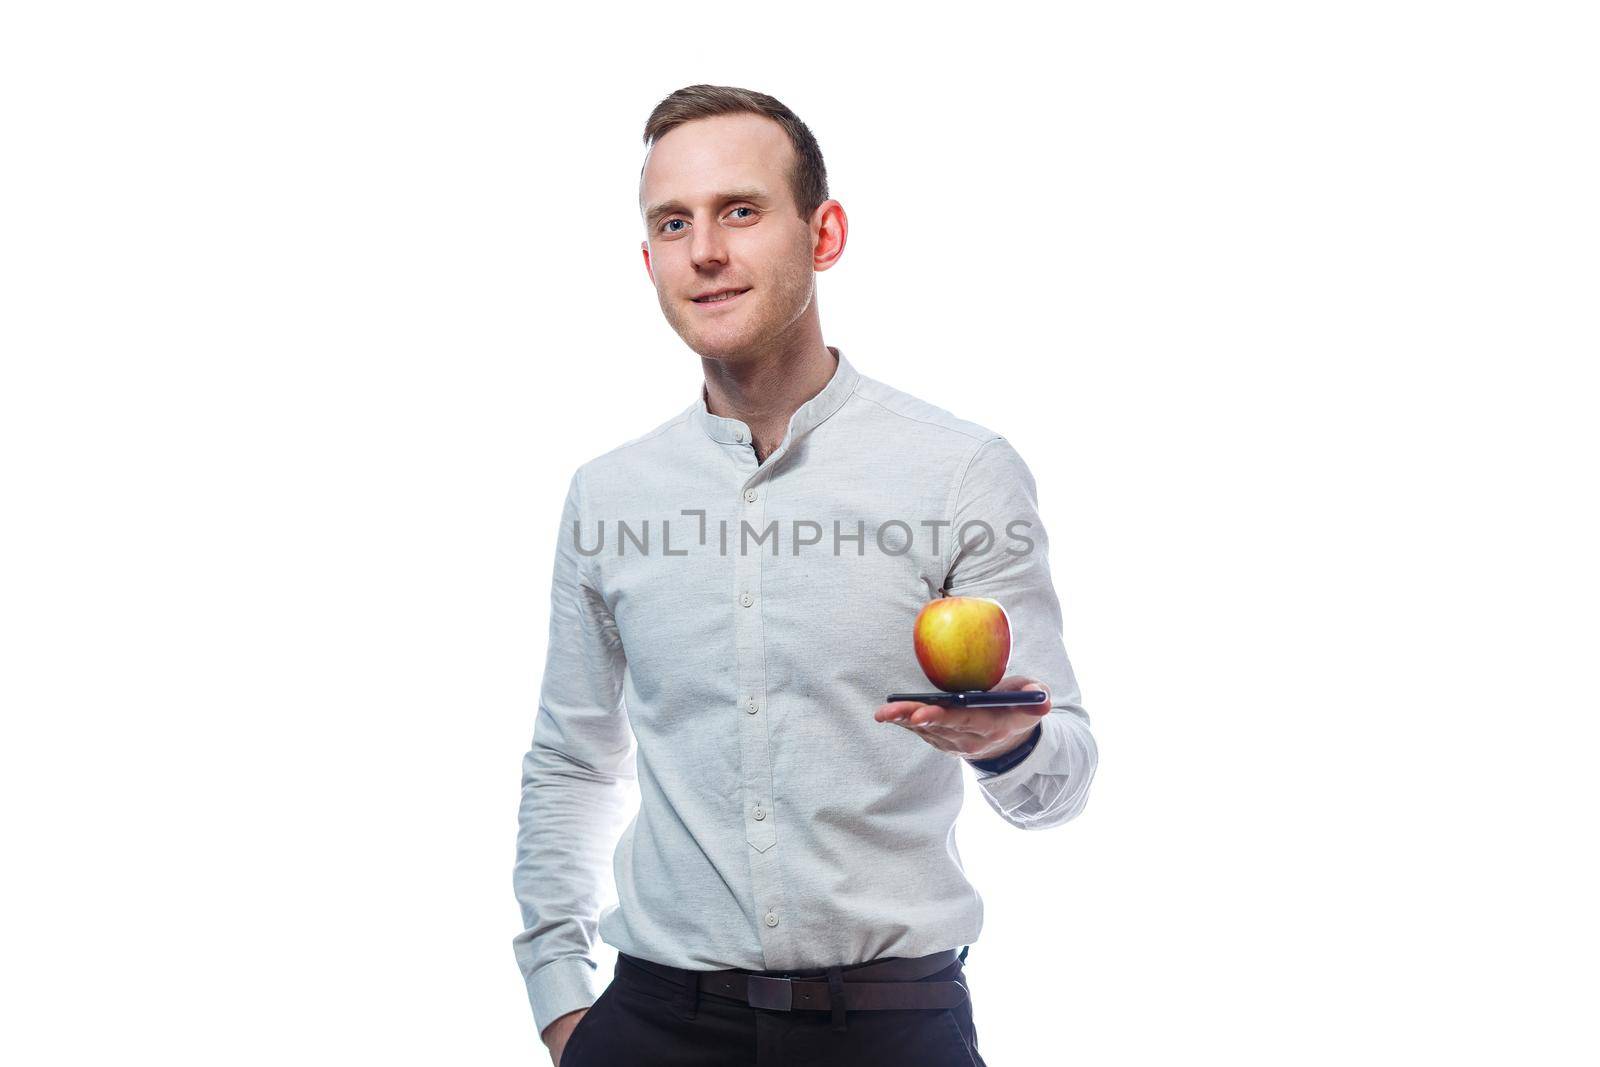 Caucasian male businessman holding a mobile phone in black and holding a red-yellow apple. He is wearing a shirt. Emotional portrait. Isolated on white background by Dmitrytph